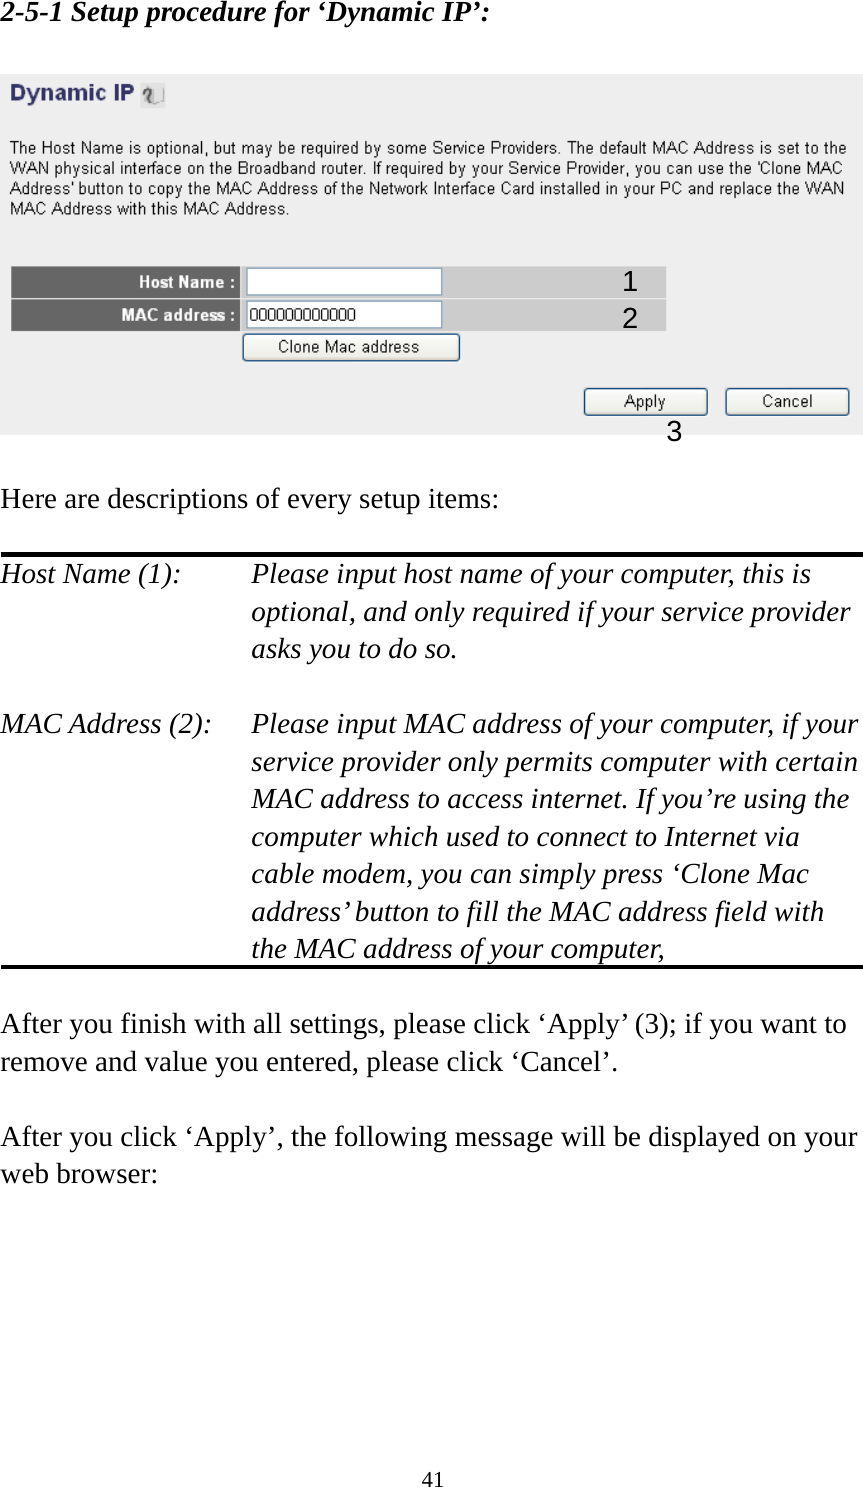 41 2-5-1 Setup procedure for ‘Dynamic IP’:    Here are descriptions of every setup items:  Host Name (1):    Please input host name of your computer, this is optional, and only required if your service provider asks you to do so.    MAC Address (2):    Please input MAC address of your computer, if your service provider only permits computer with certain MAC address to access internet. If you’re using the computer which used to connect to Internet via cable modem, you can simply press ‘Clone Mac address’ button to fill the MAC address field with the MAC address of your computer,   After you finish with all settings, please click ‘Apply’ (3); if you want to remove and value you entered, please click ‘Cancel’.  After you click ‘Apply’, the following message will be displayed on your web browser:  1 2 3 